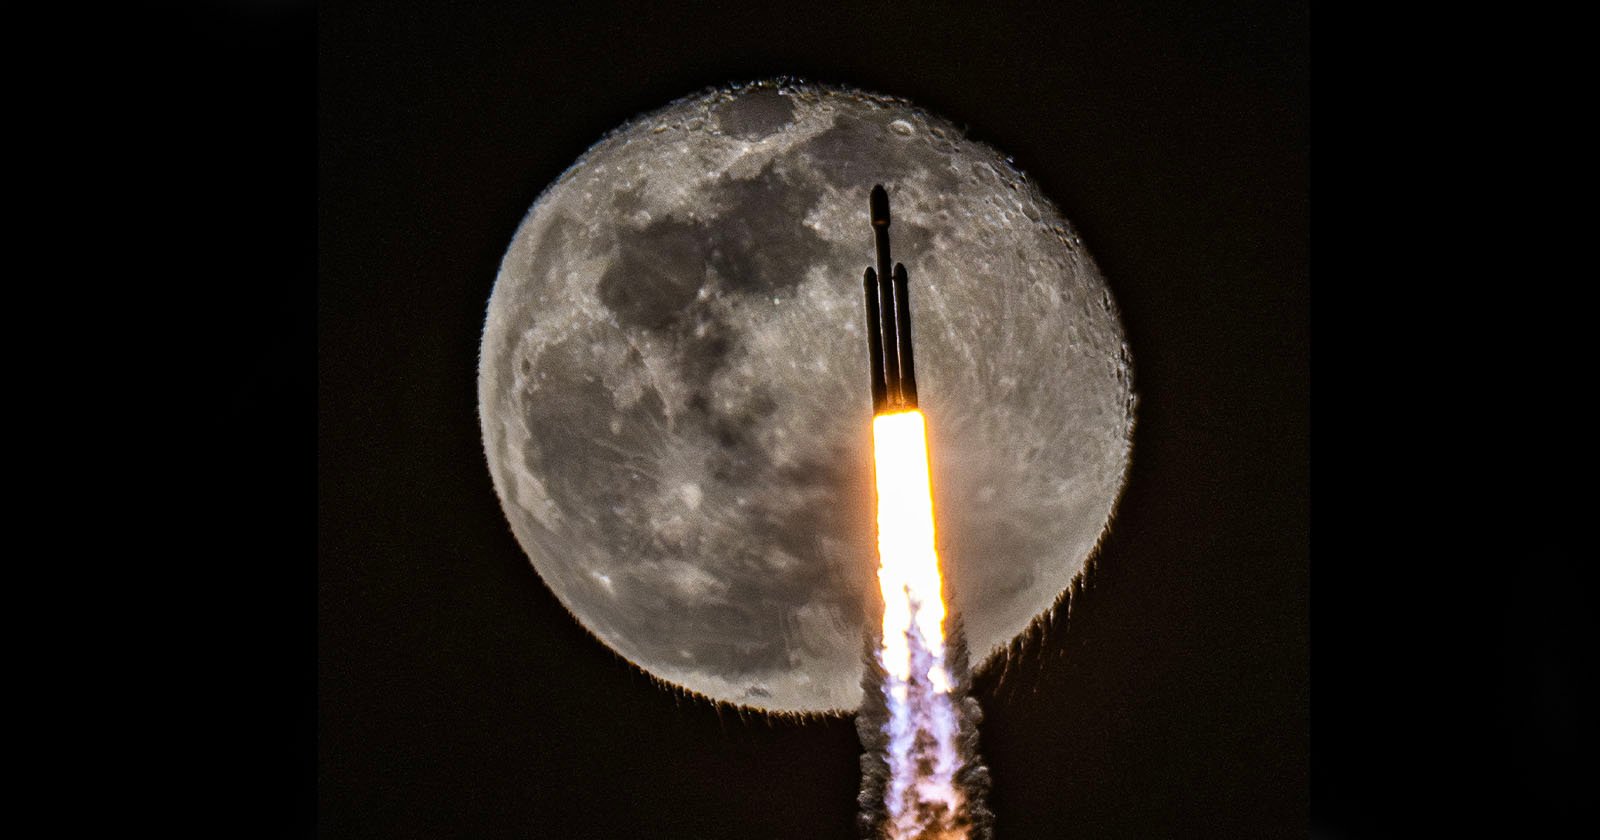 SpaceX Rocket Causes Moon to Ripple in Photographers Fantastic Image